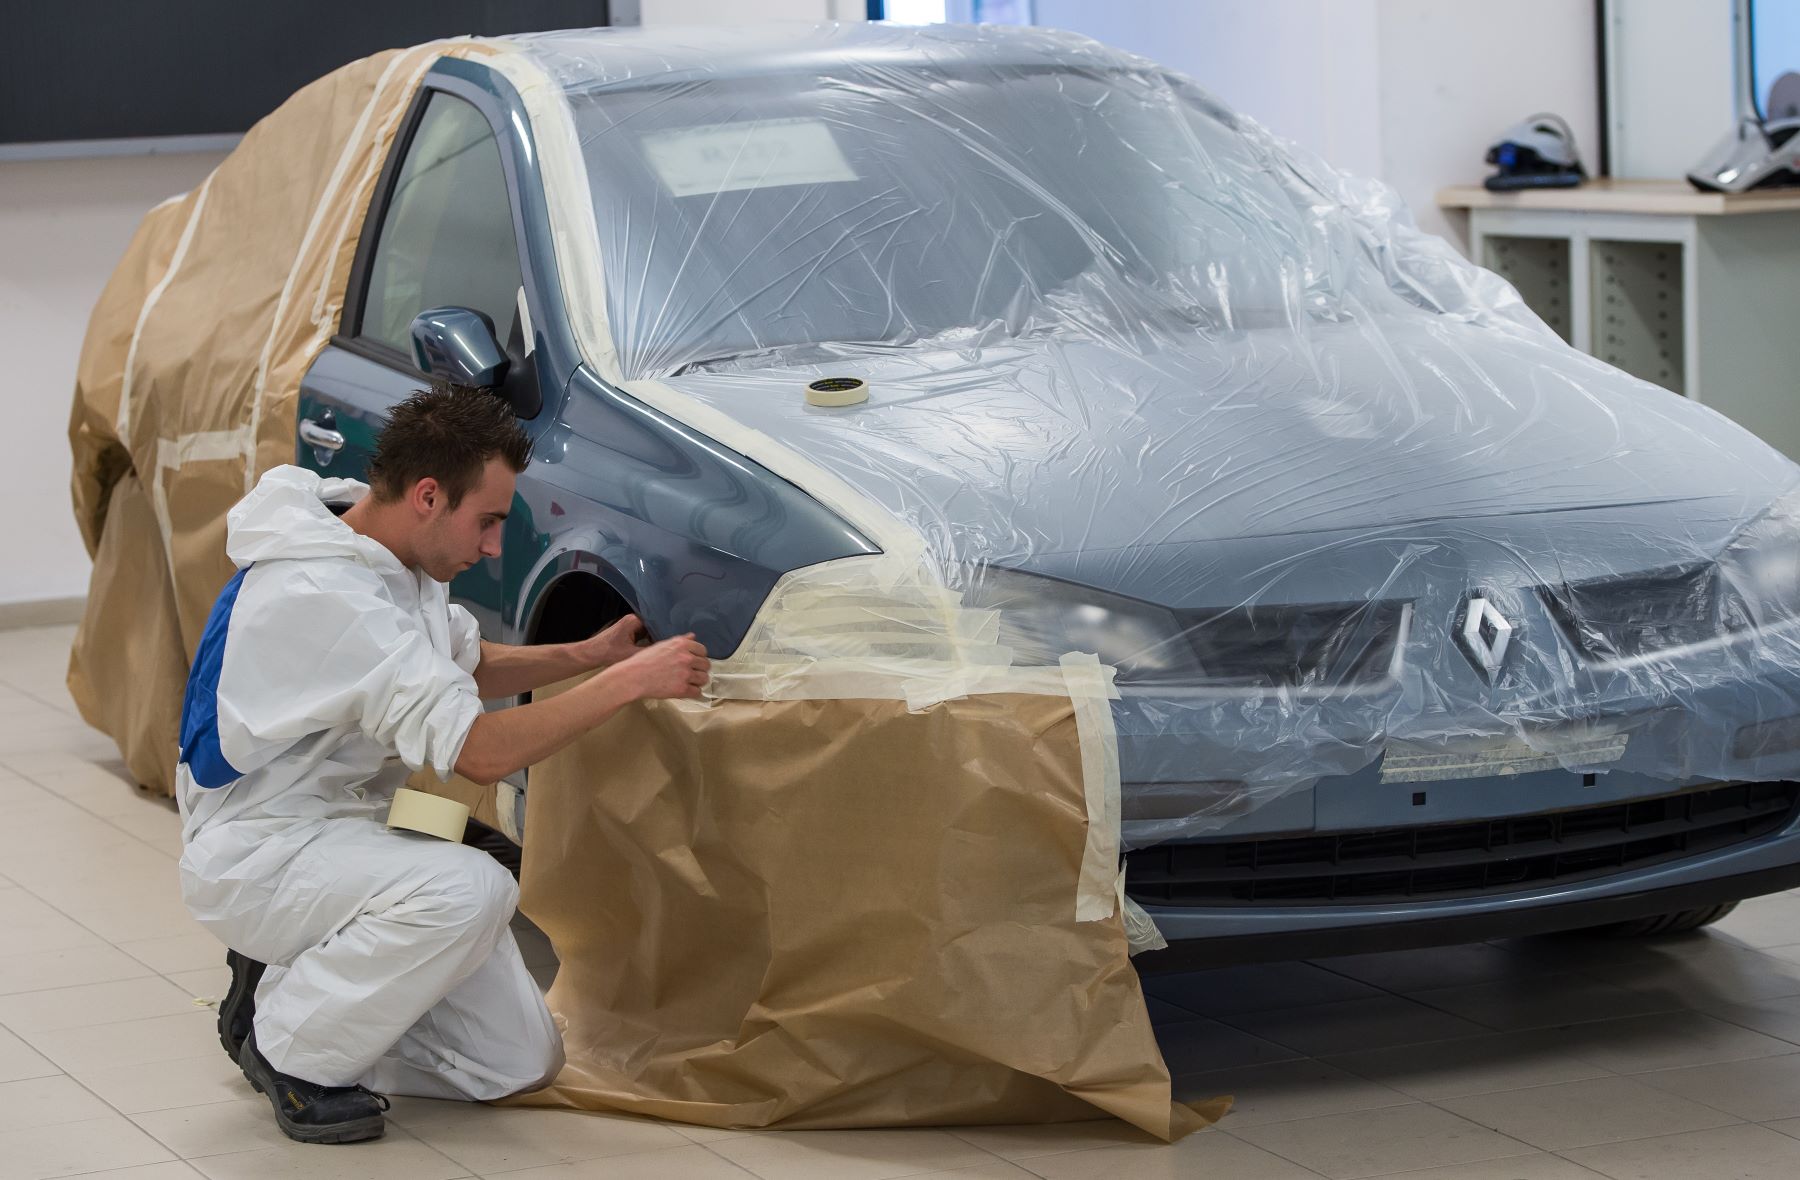 An apprentice applying paint protection to a Renault car as a dealer option